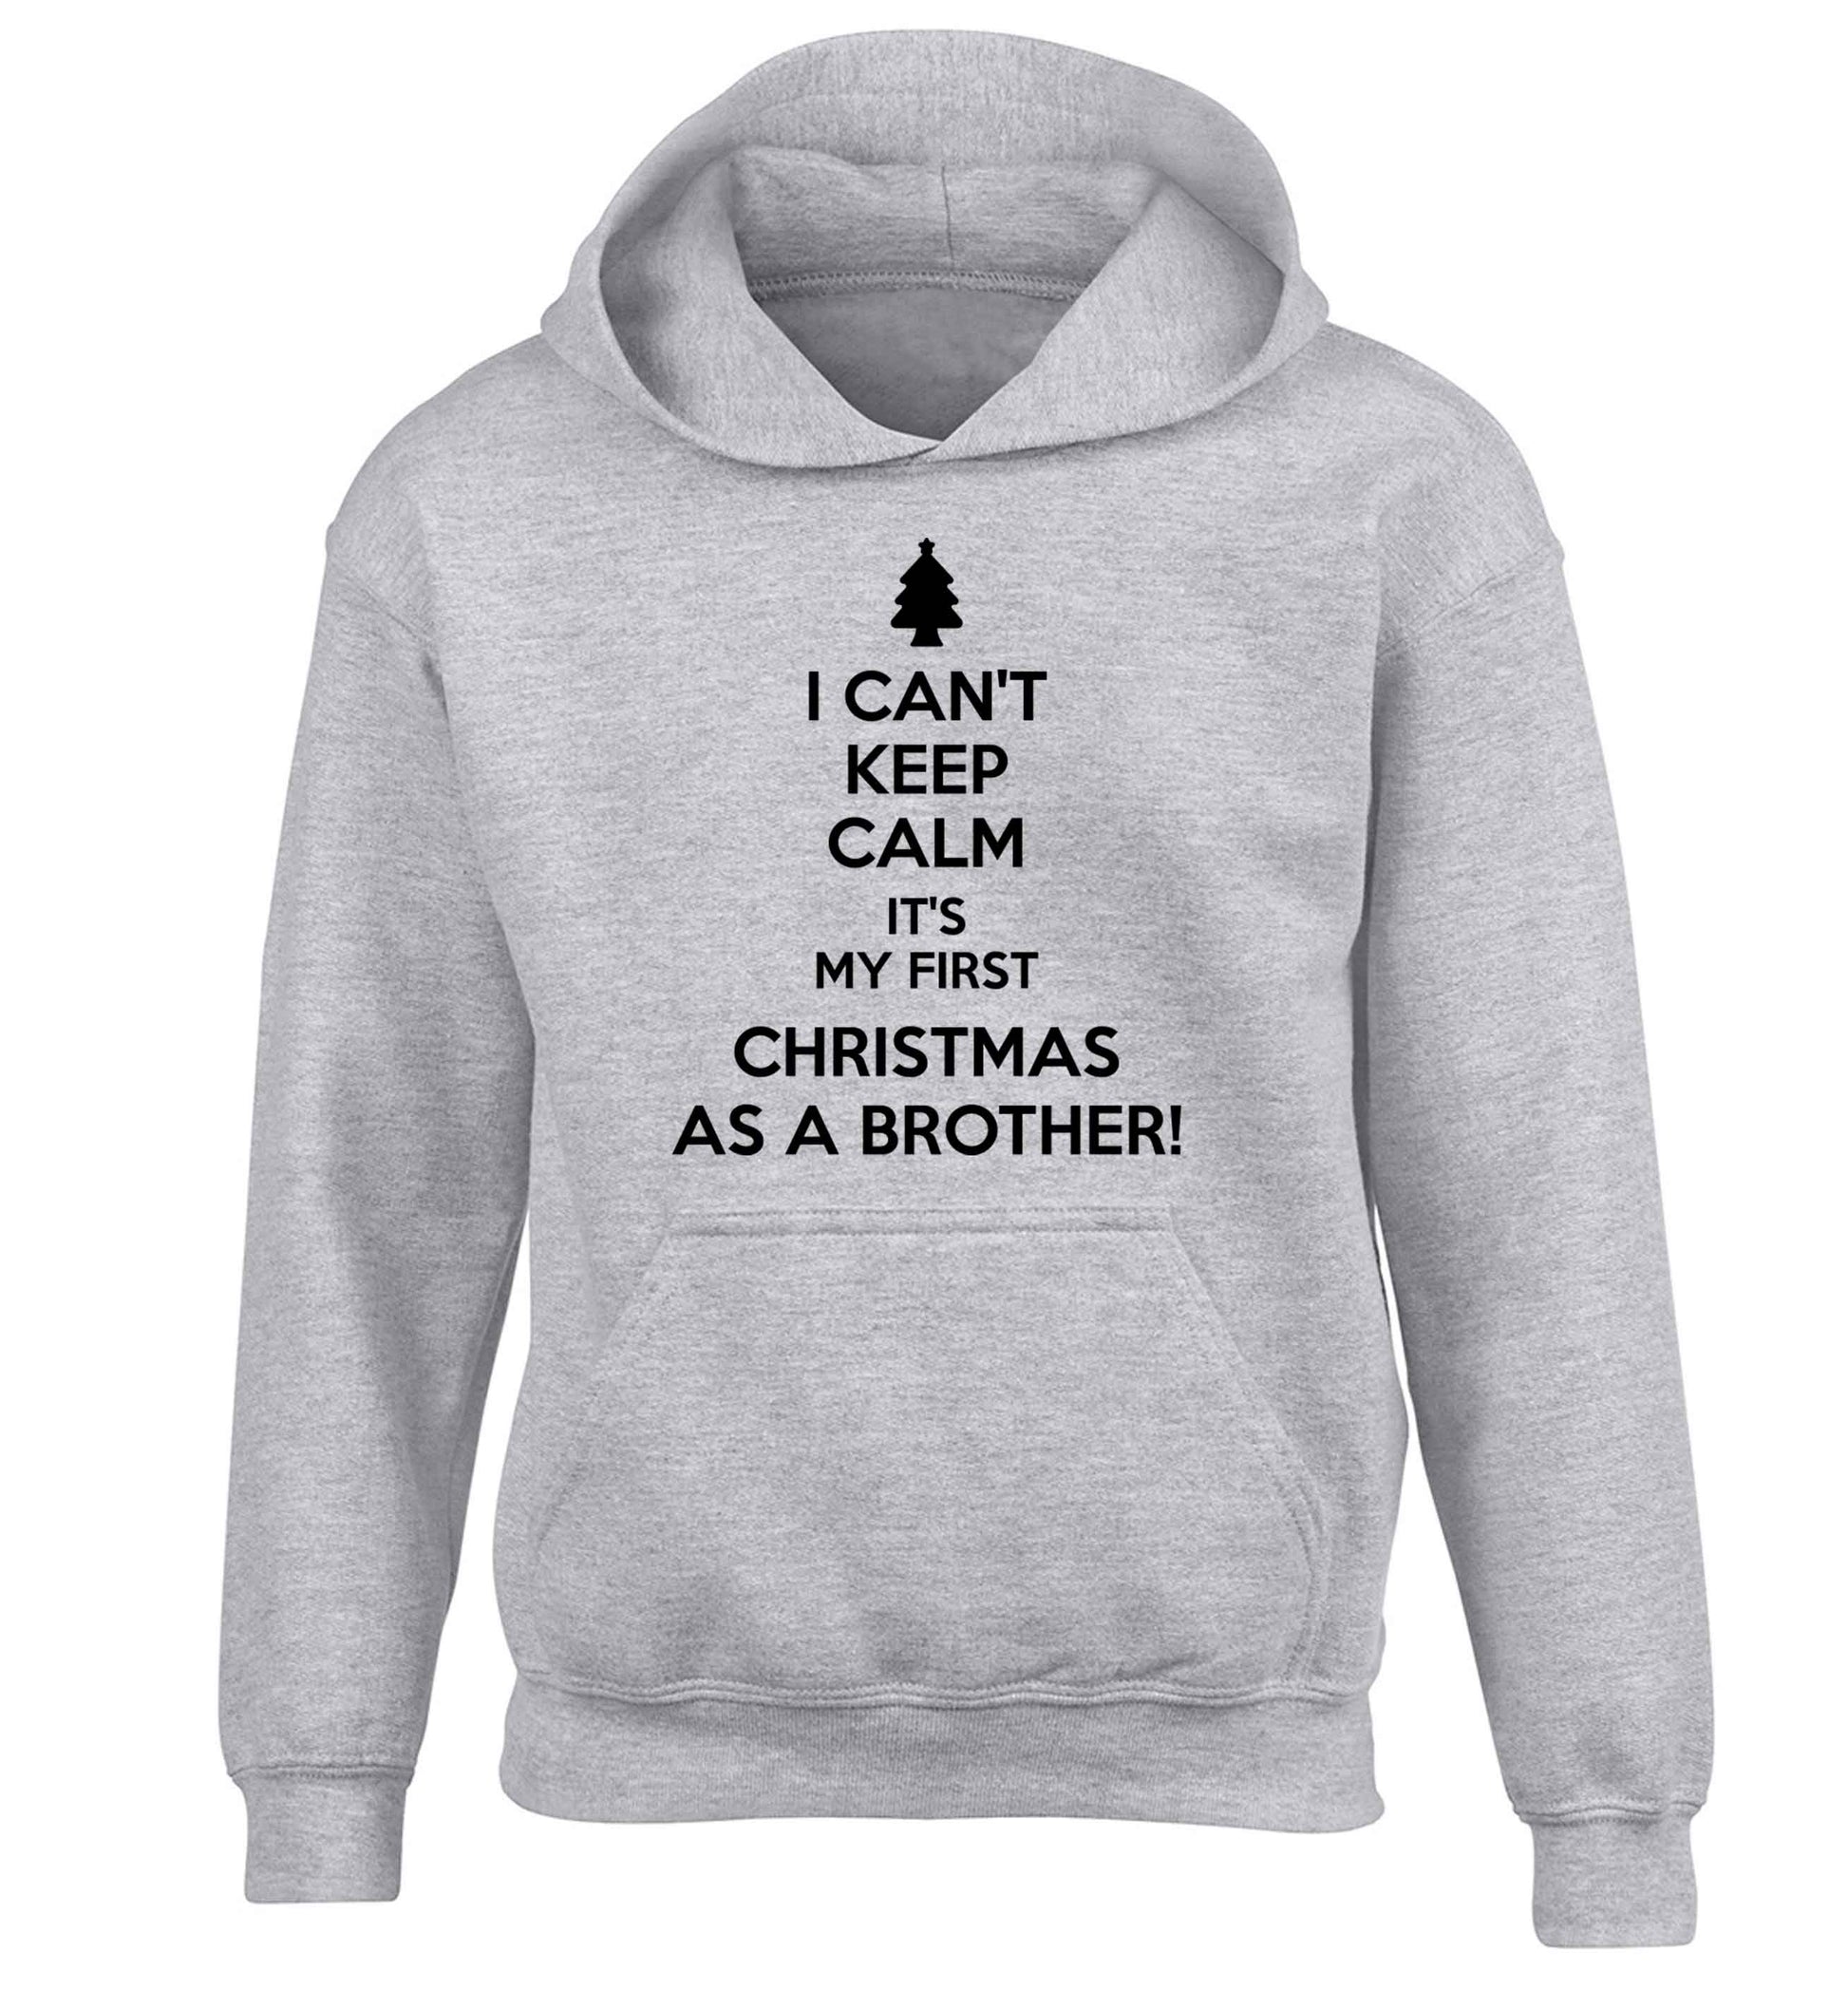 I can't keep calm it's my first Christmas as a brother! children's grey hoodie 12-13 Years